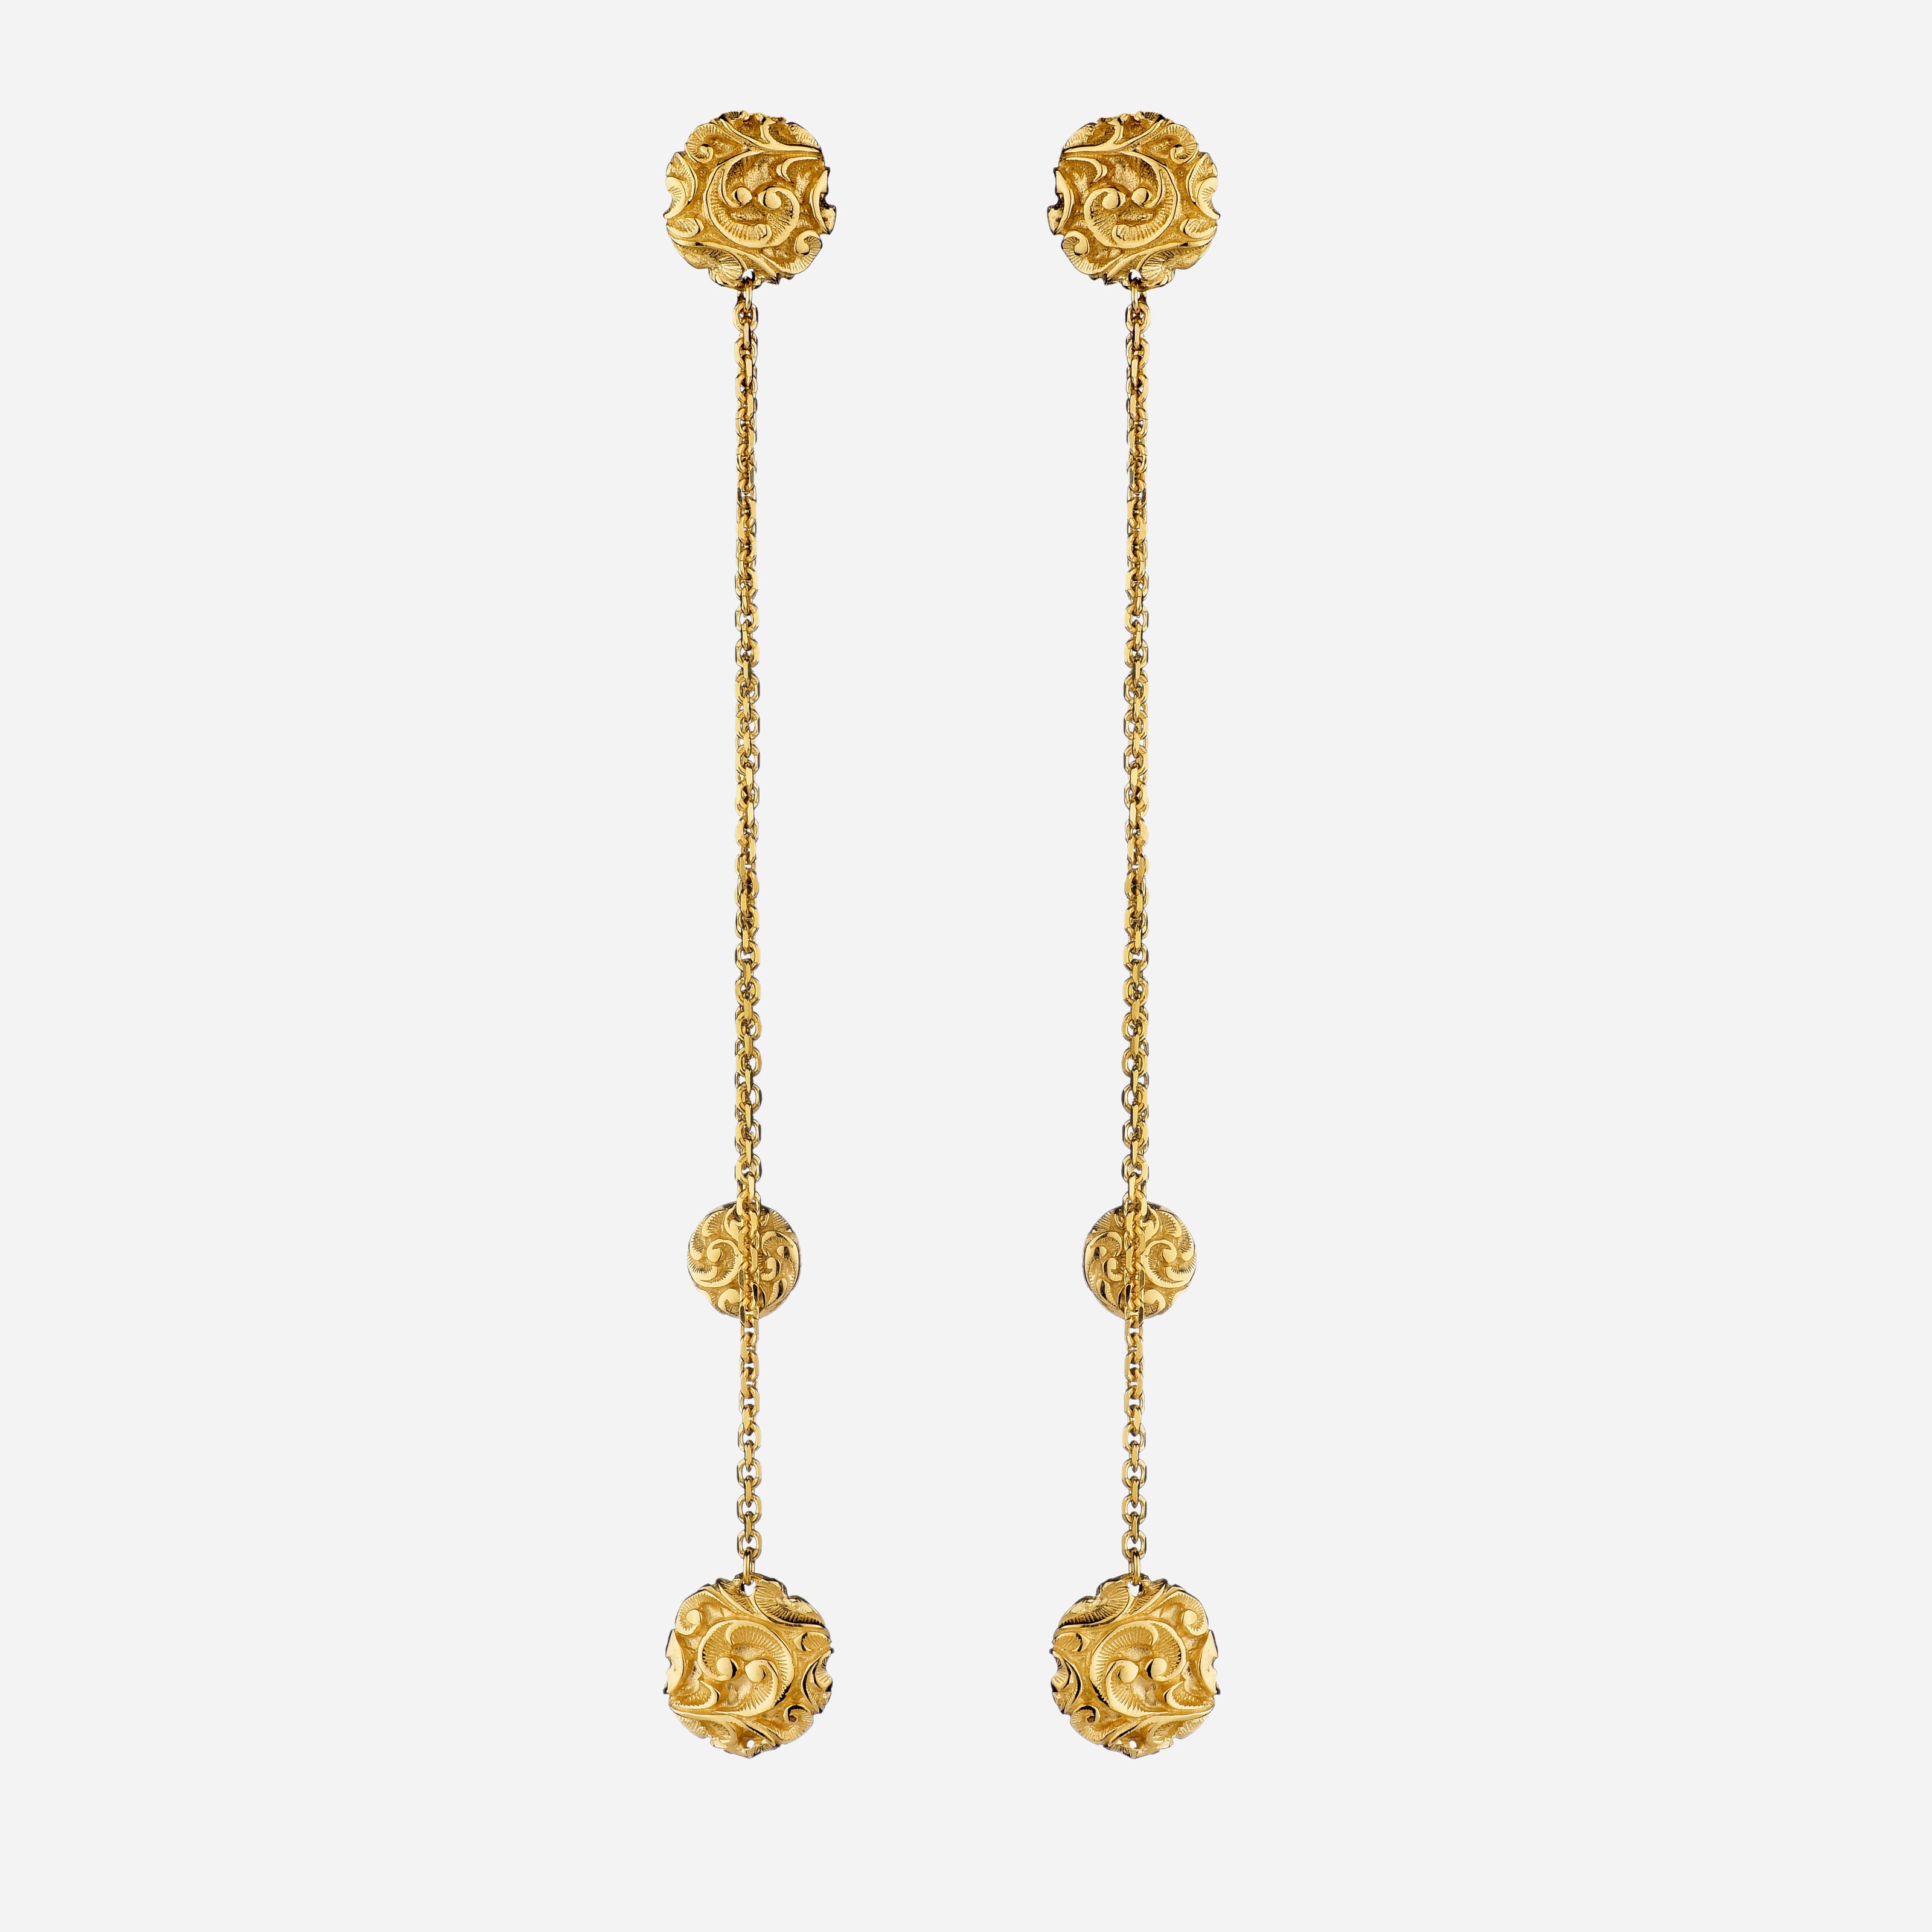 Carved gold earrings with hanging lentils